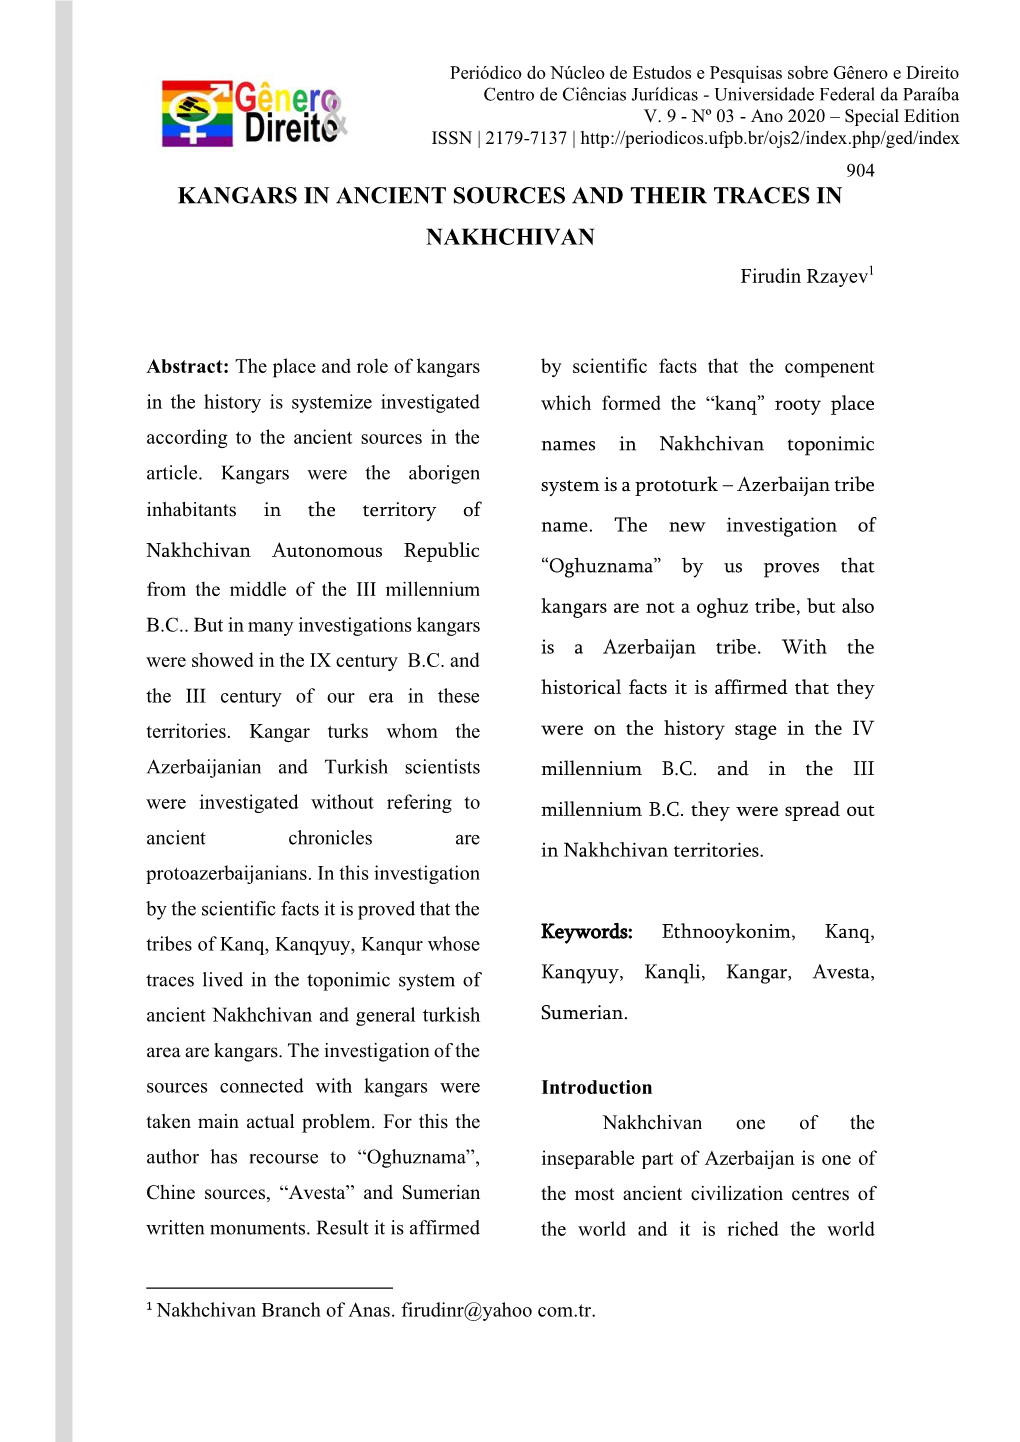 KANGARS in ANCIENT SOURCES and THEIR TRACES in NAKHCHIVAN Firudin Rzayev1